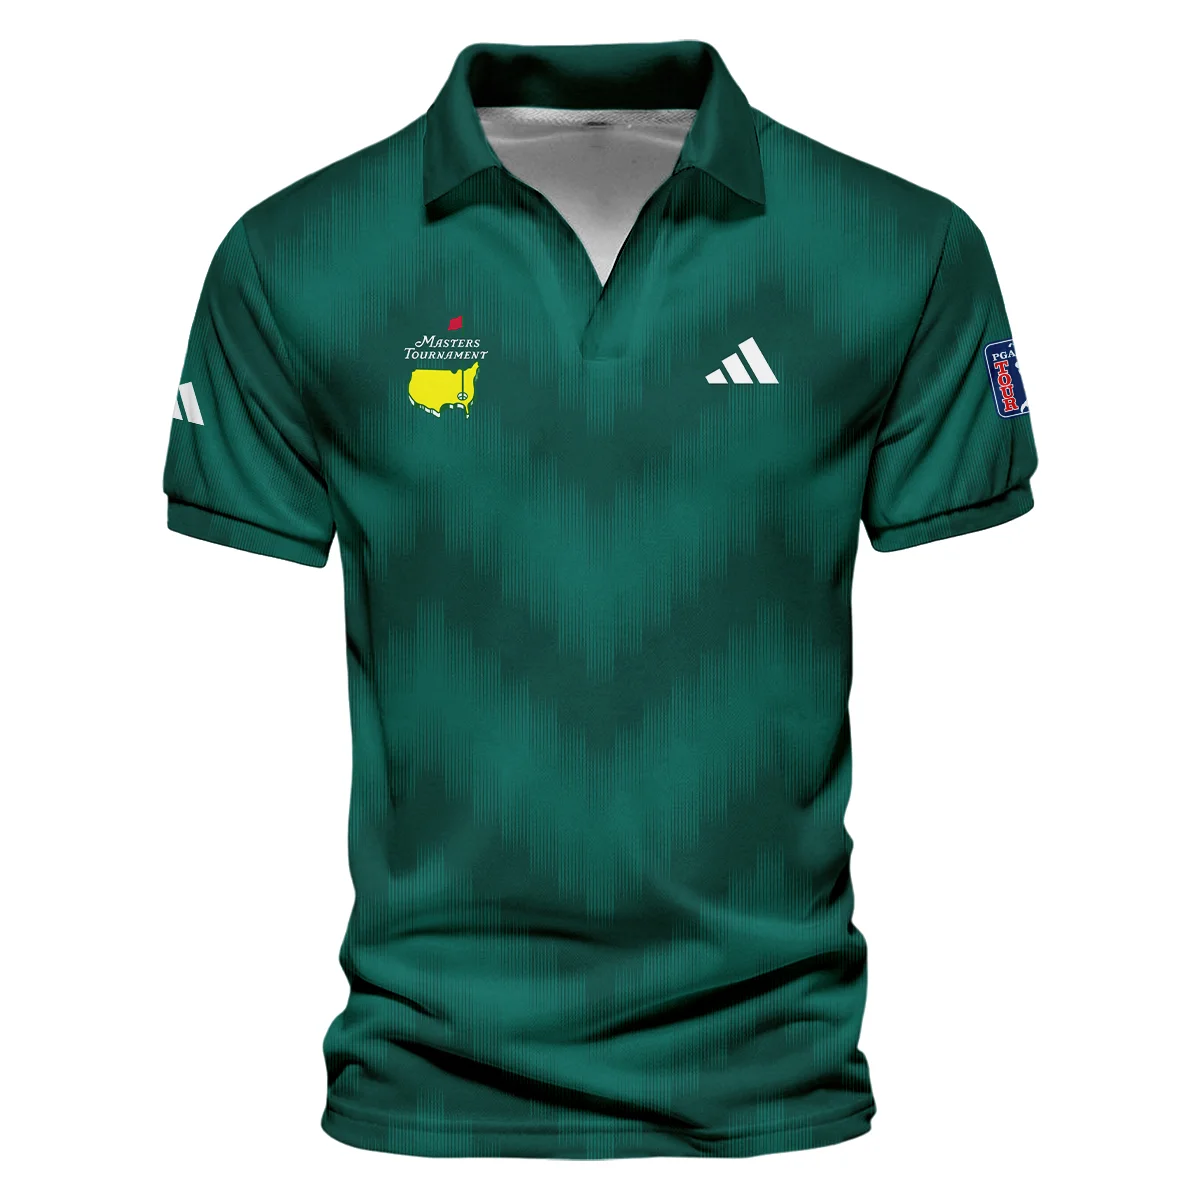 Golf Sport Green Gradient Stripes Pattern Adidas Masters Tournament Vneck Long Polo Shirt Style Classic Long Polo Shirt For Men